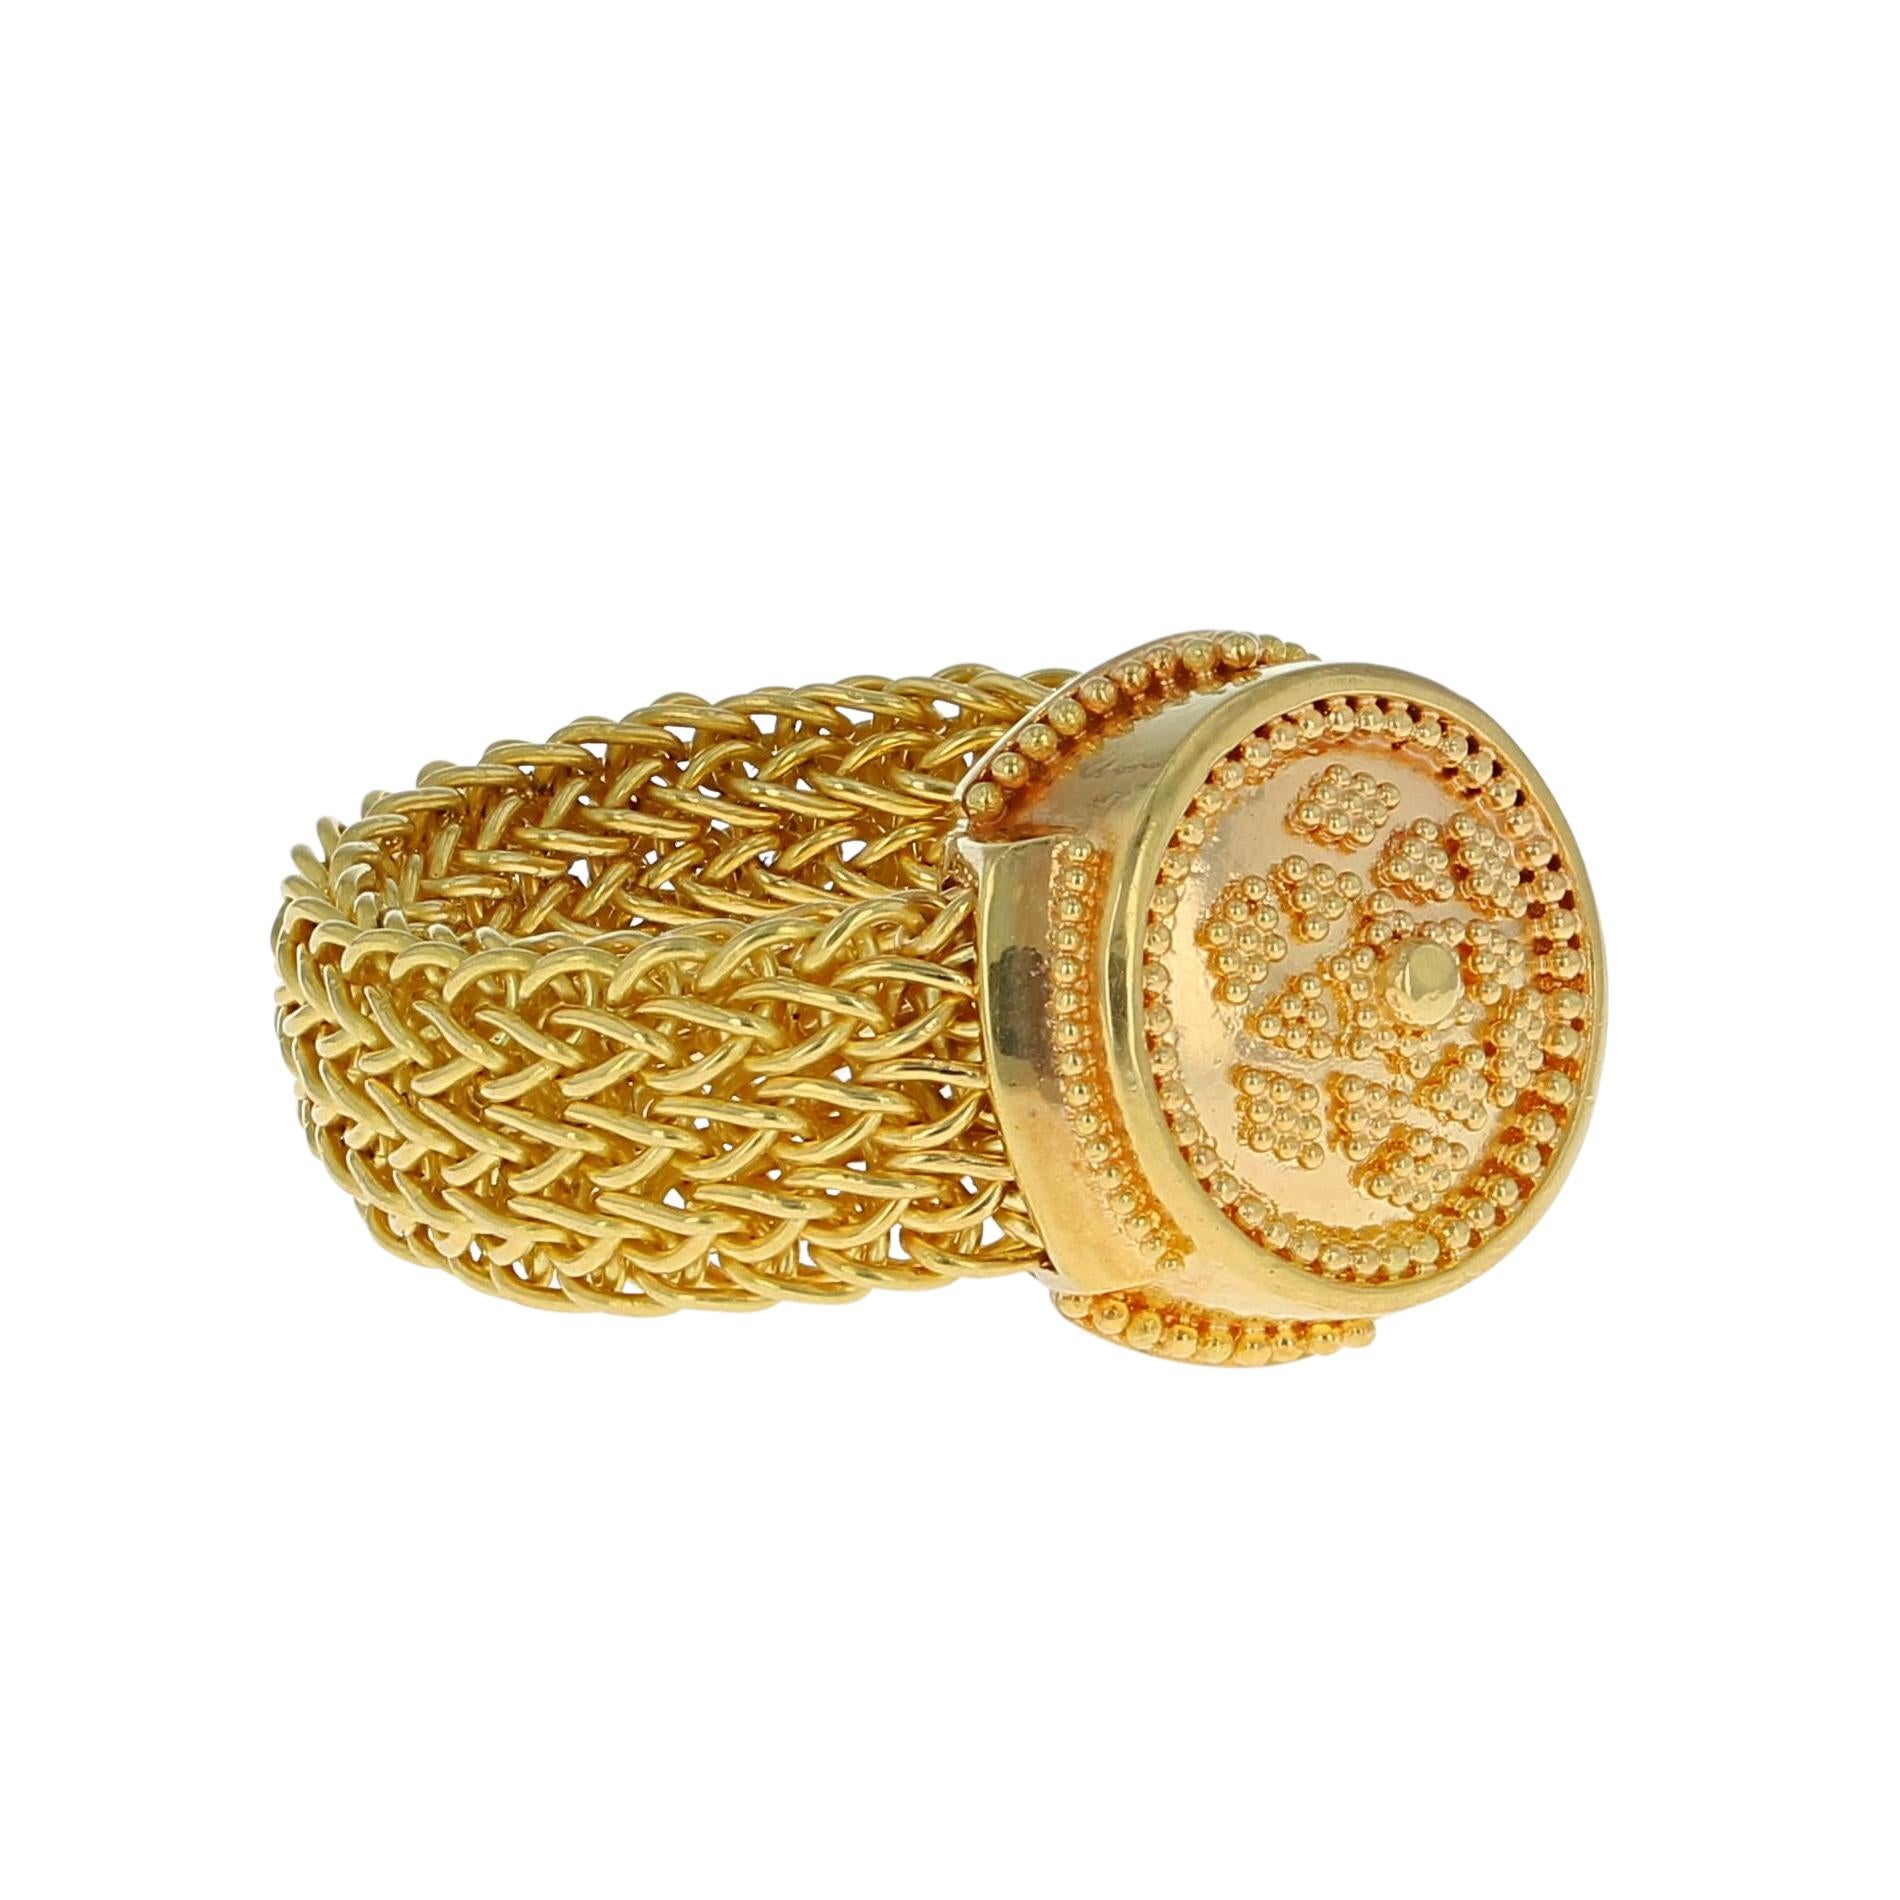 A unique ring design from the Kent Raible 'Studio Collection'! This ring features the Raible classic gold granulation, but uses a flexible mesh, hand woven chain band! 

Unlike much “designer” jewelry made today, all jewelry work is done under